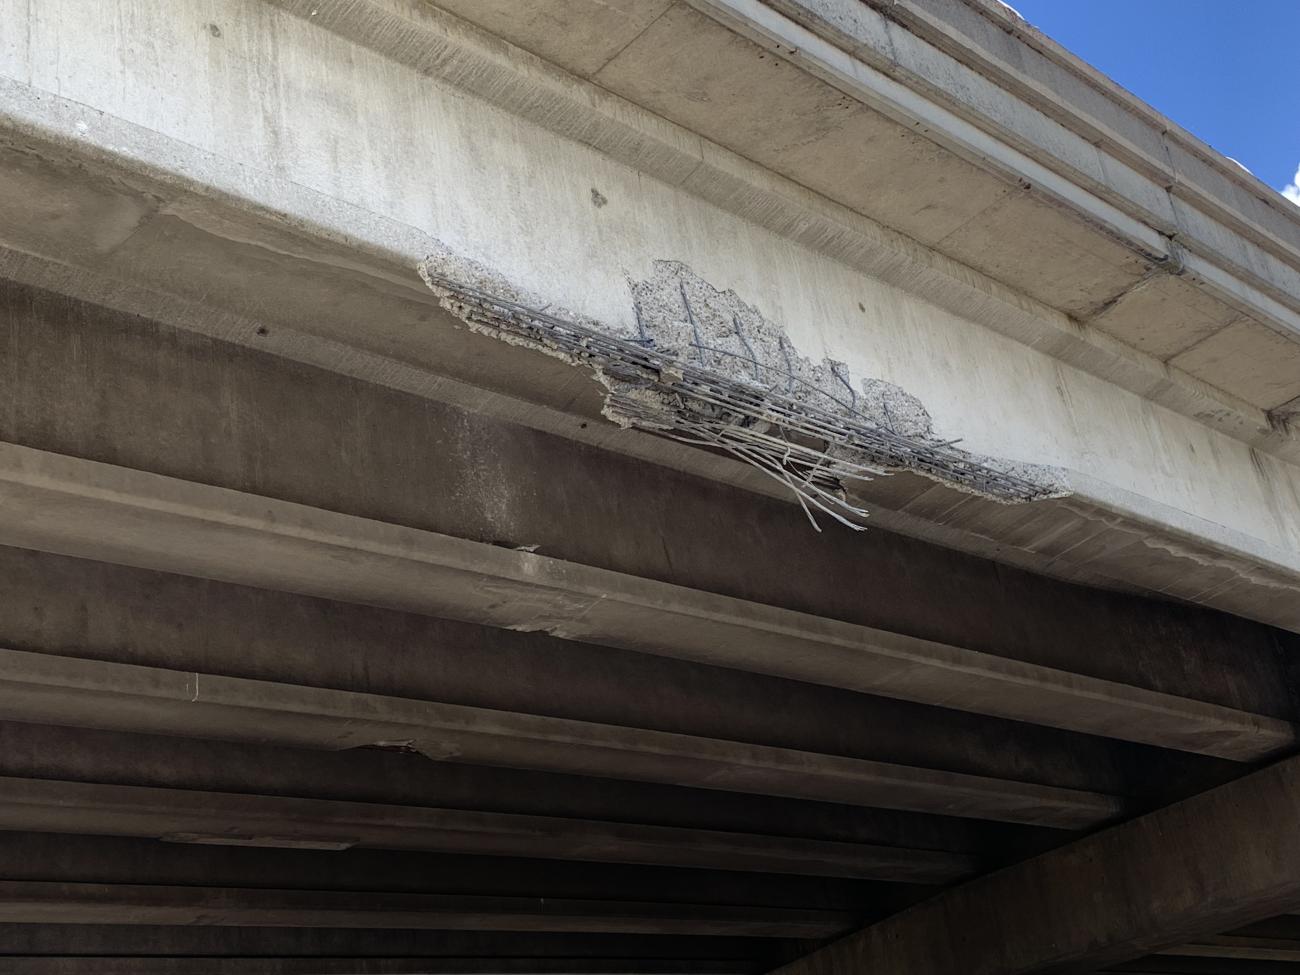 State Route 14 - Lieser Road Overpass - Bridge Damage on the eastern facing side of the bridge